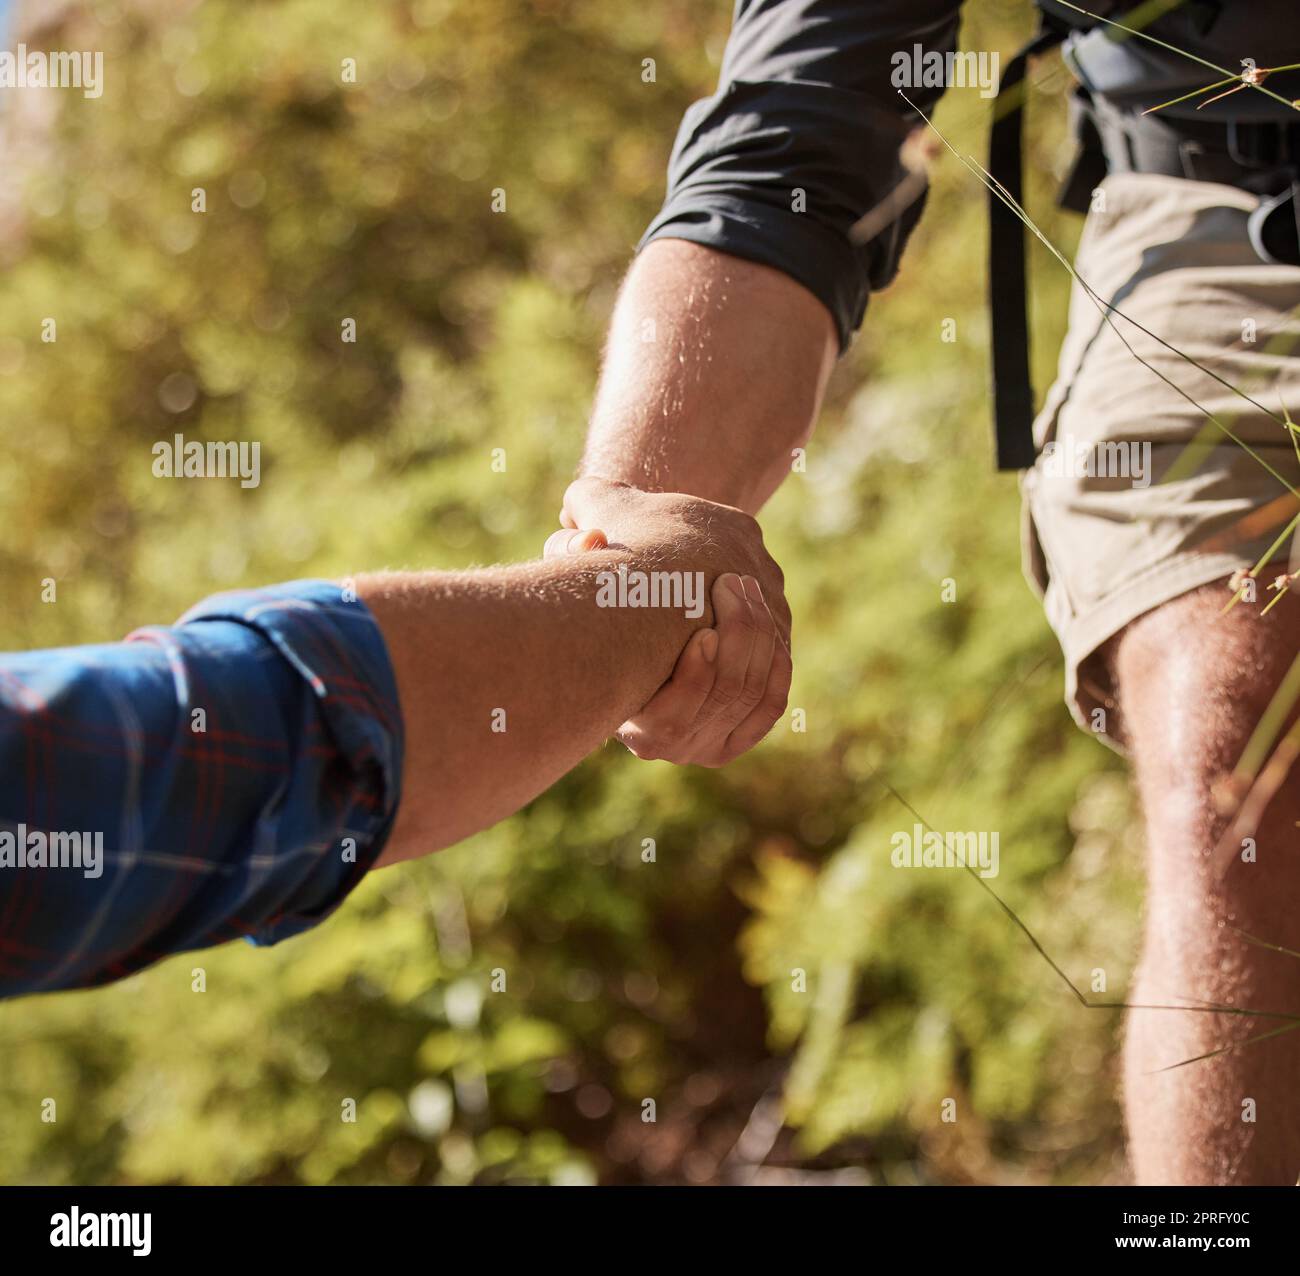 Support, teamwork and helping hands by hikers hiking outdoors in nature on a mountain trail. Fit and active friends help each other closeup and while trekking and climbing tough terrain Stock Photo